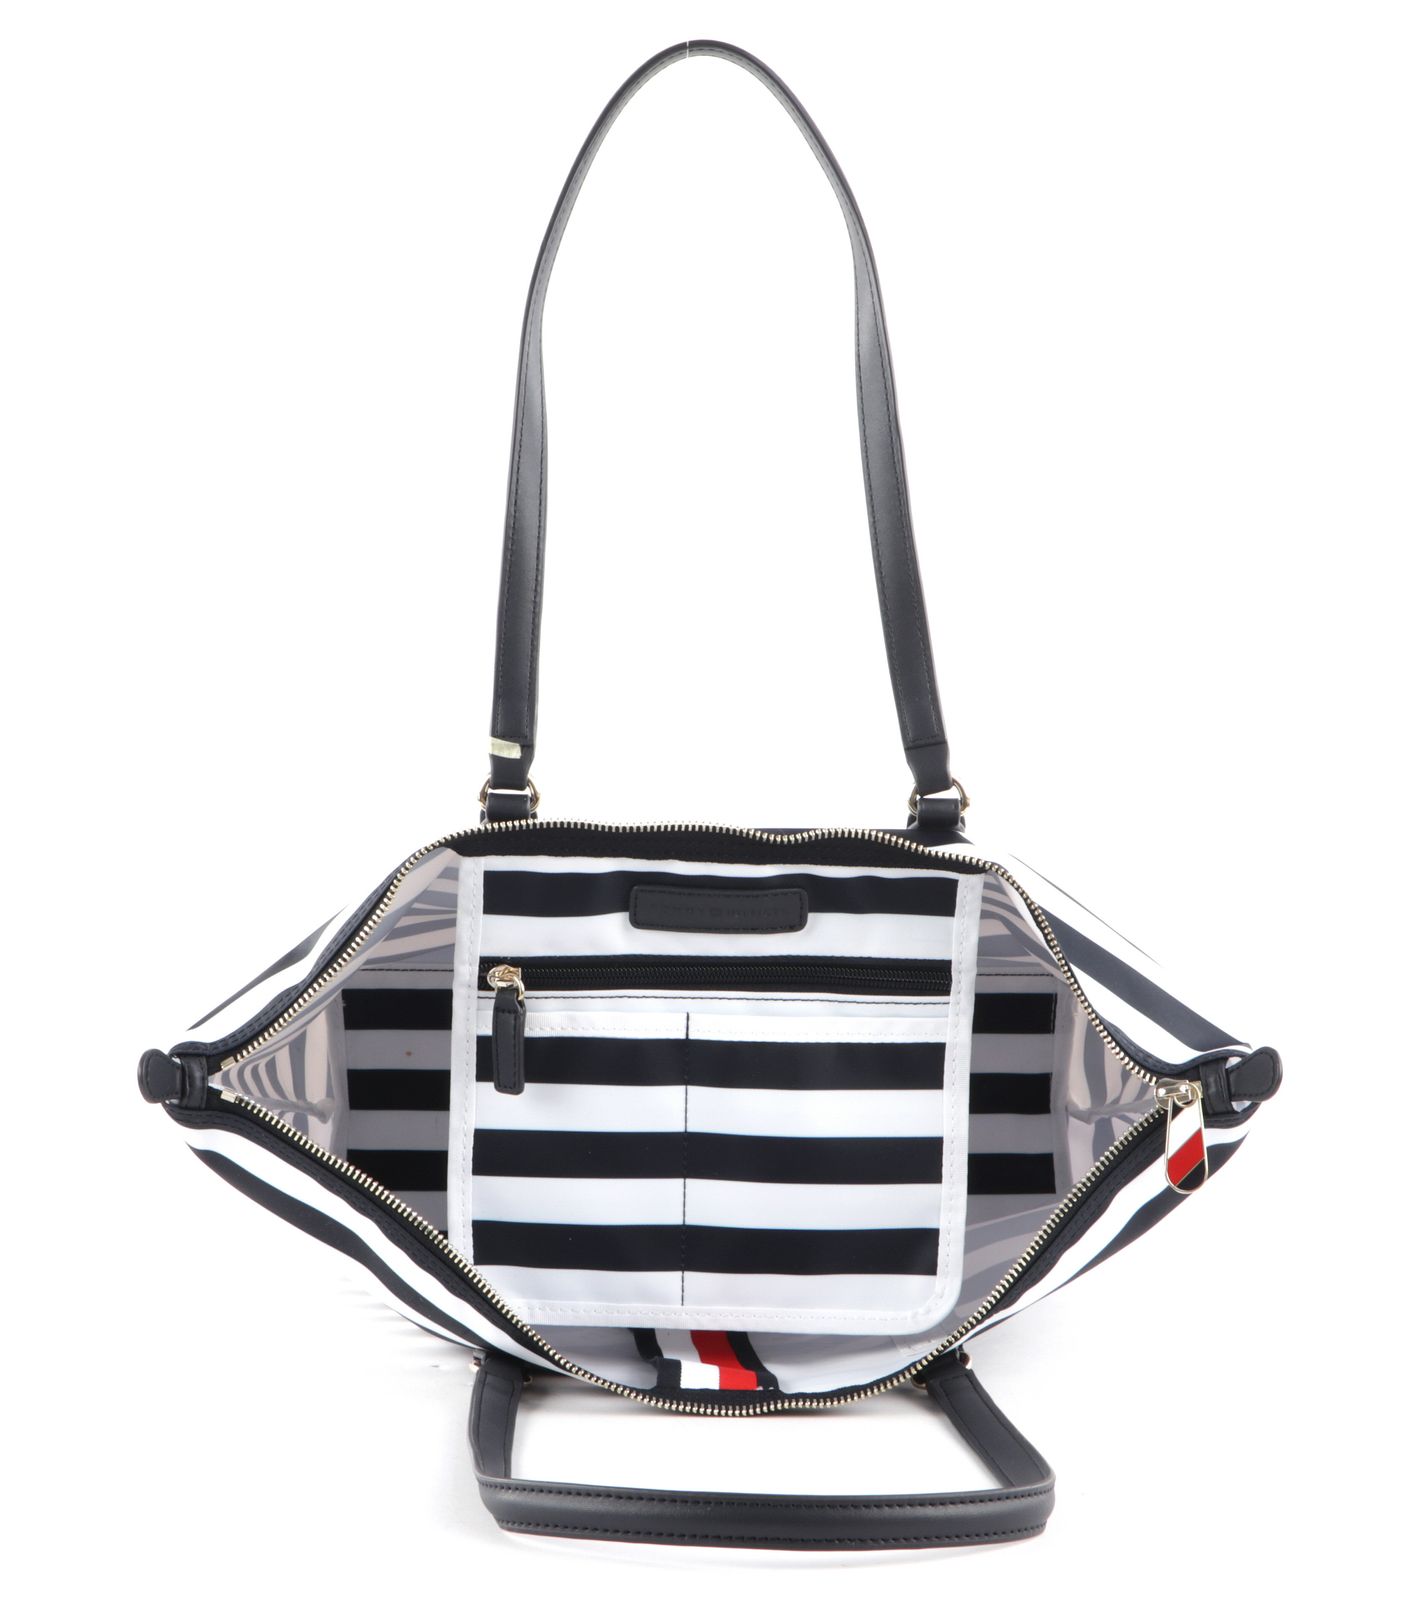 TOMMY HILFIGER Tote Navy Blue Stripes | Buy bags, purses & accessories ...